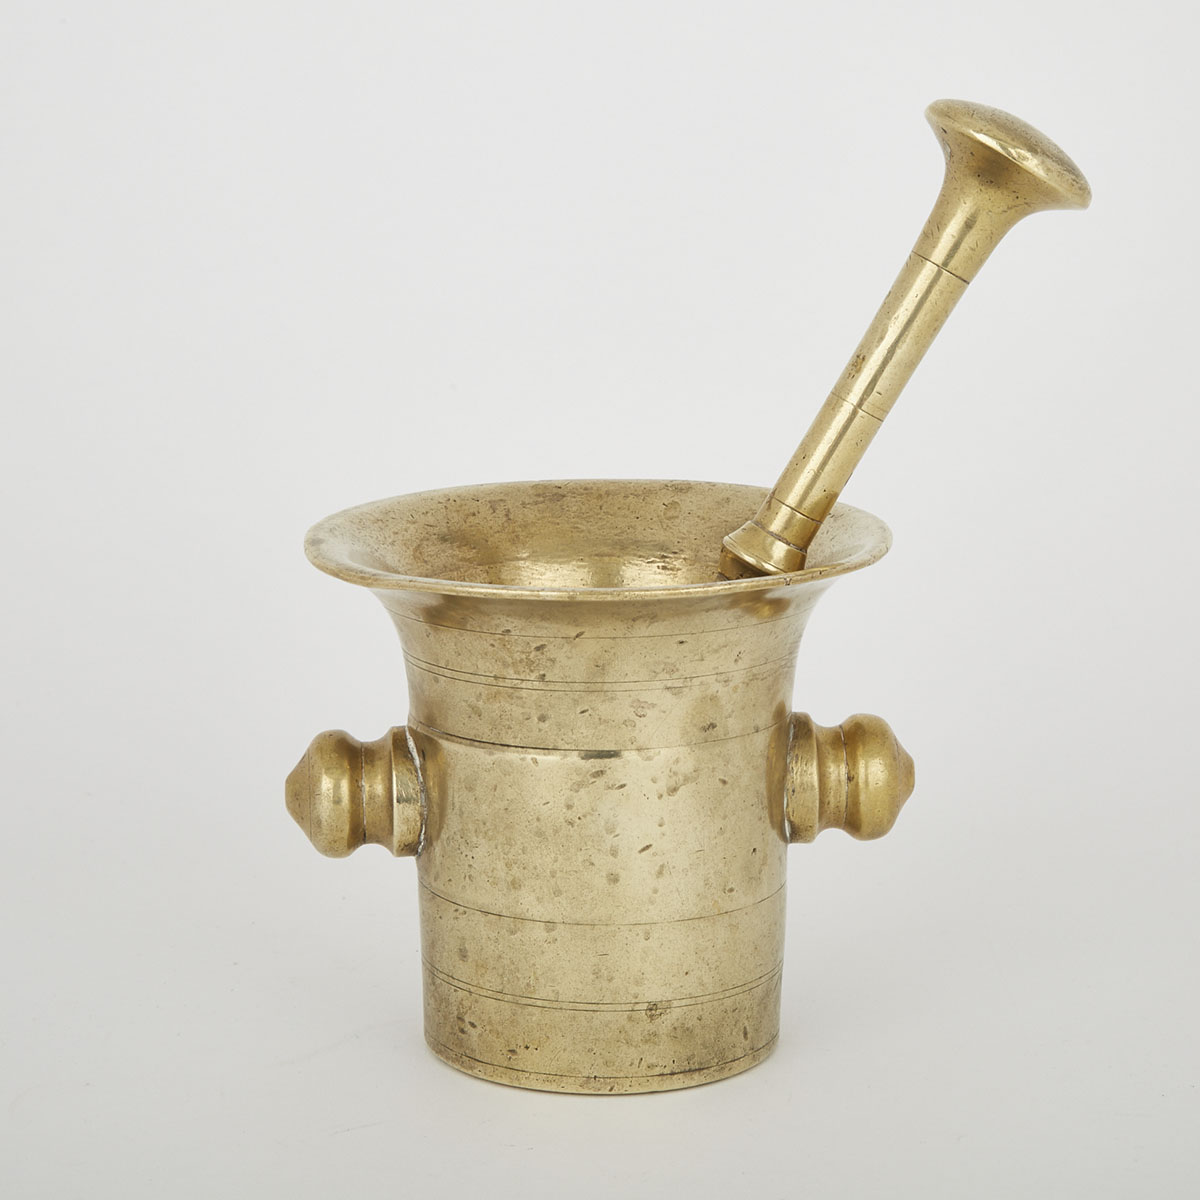 Polished Bronze Mortar and Pestle, 19th century